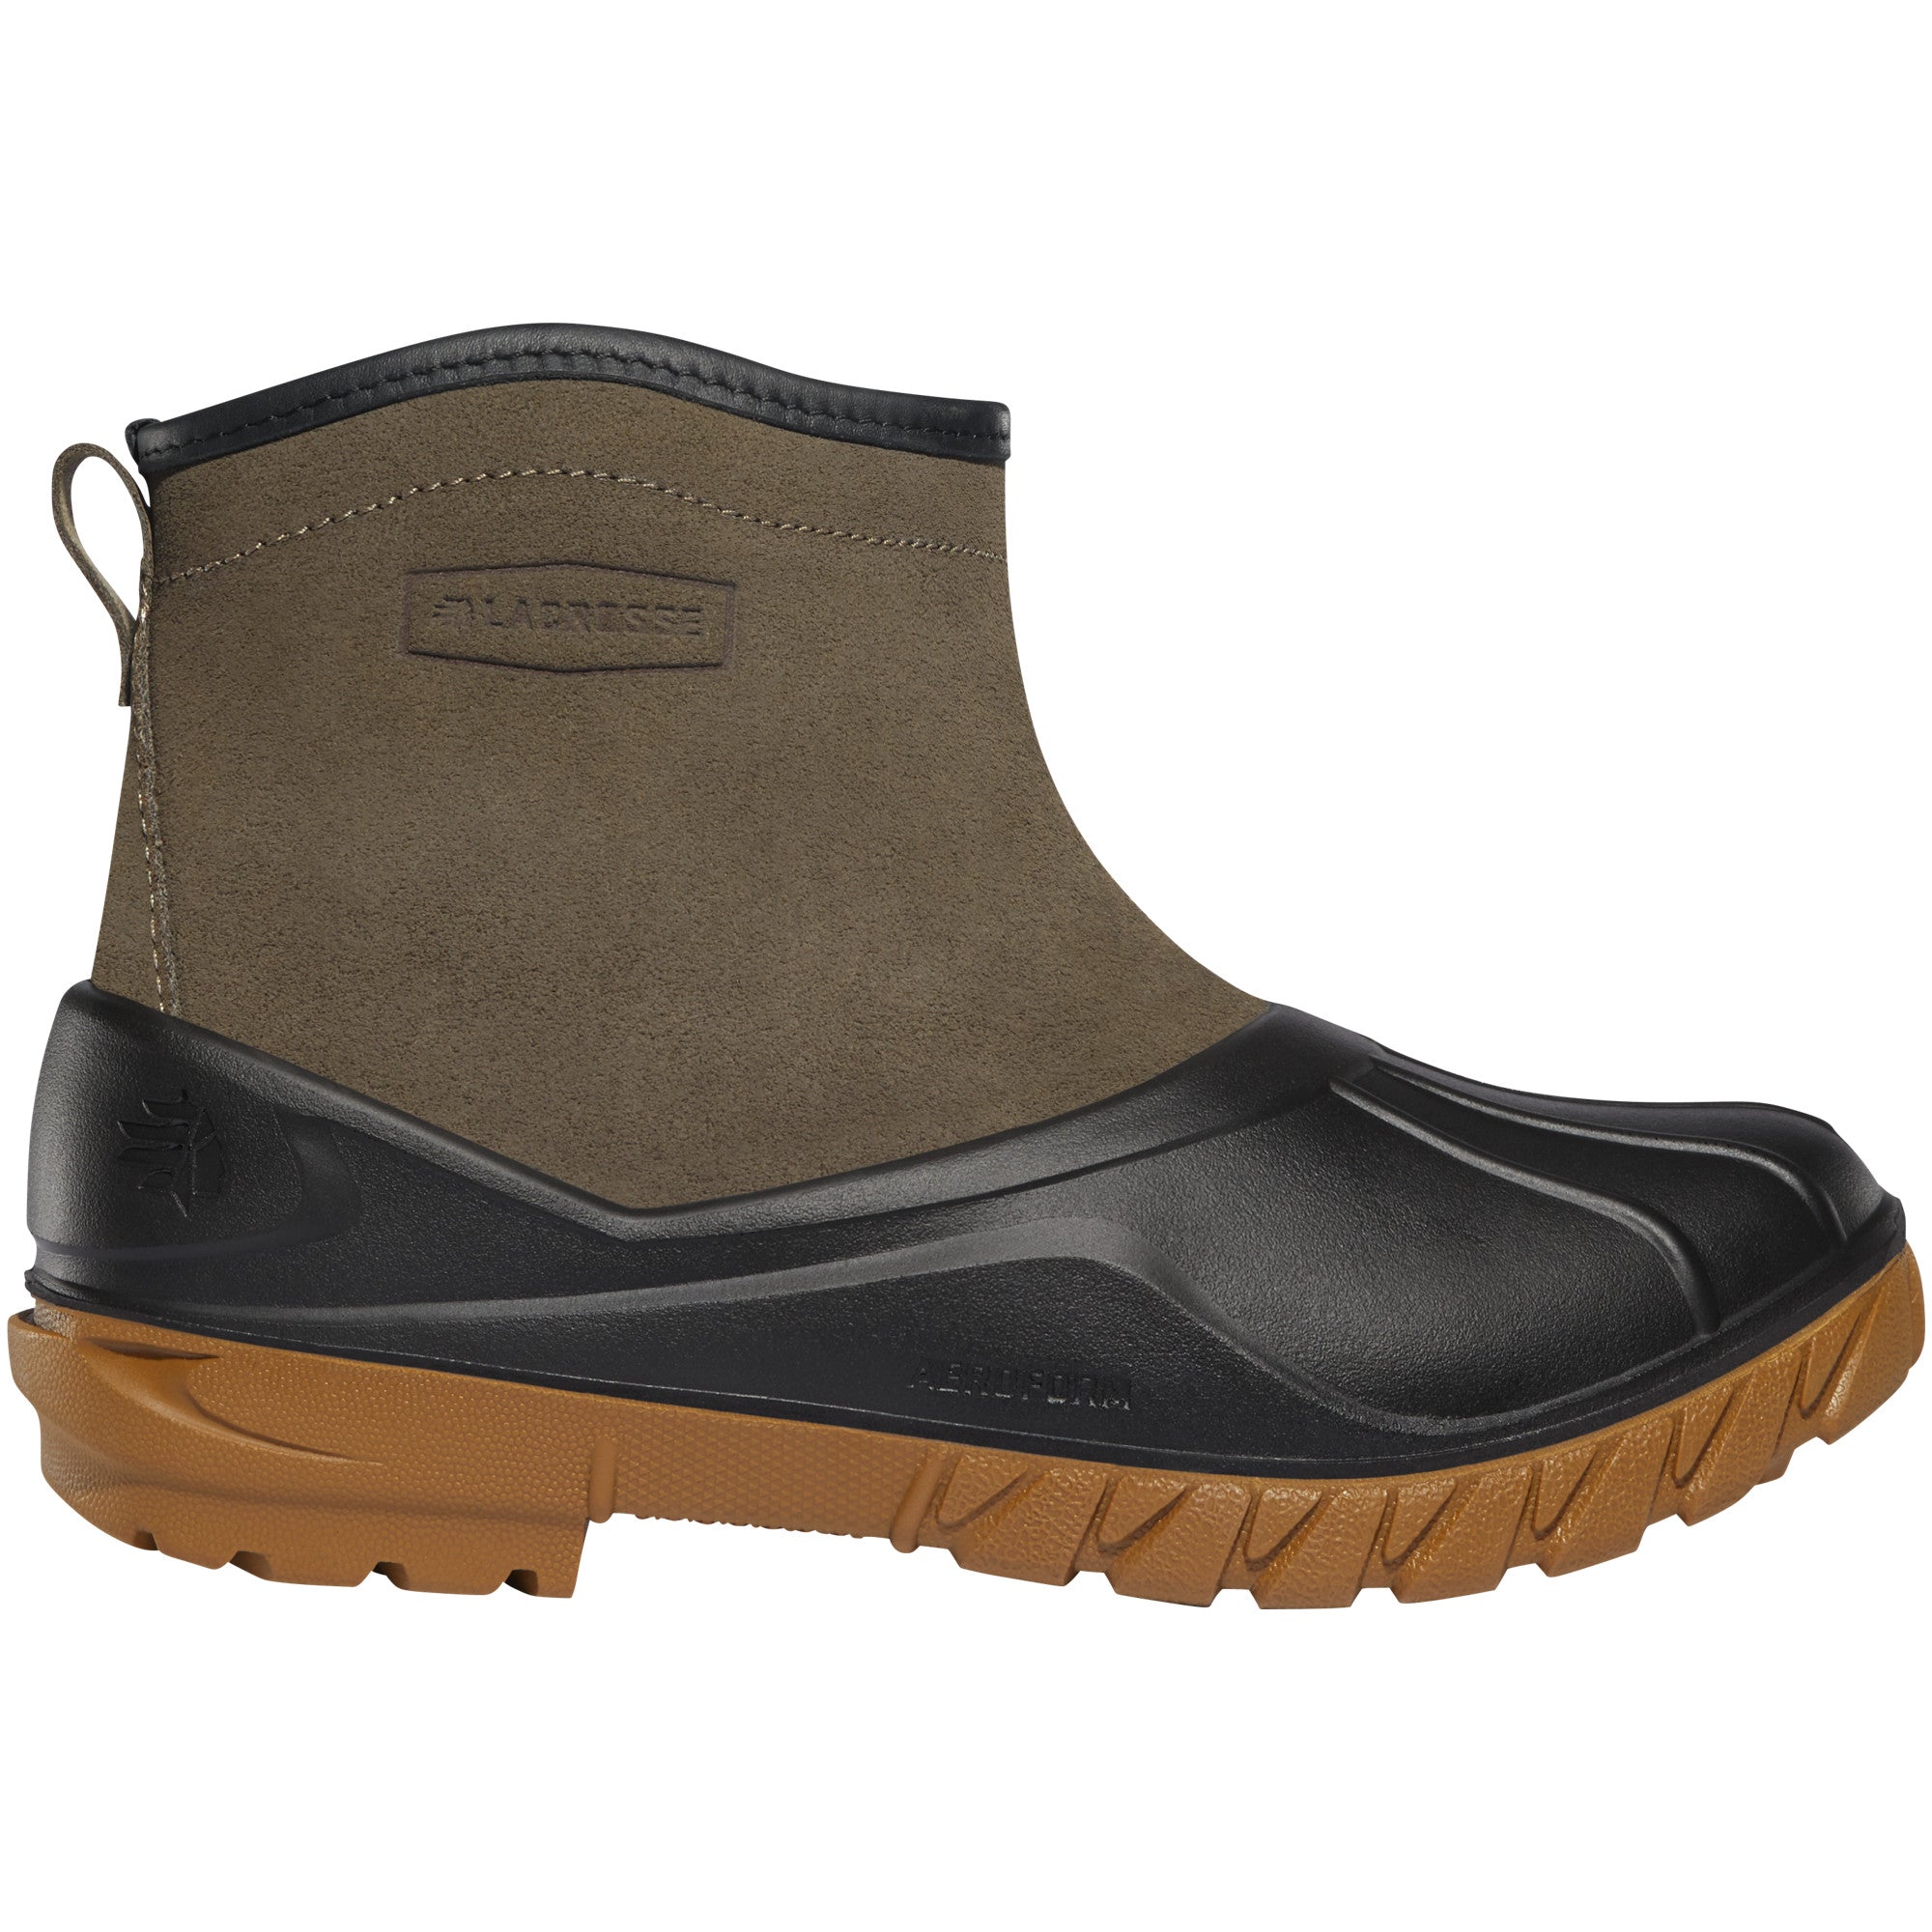 LaCrosse Men's Aero Timber Top Slip-On 6" Waterproof Outdoor Boot in Gray/Black from the side